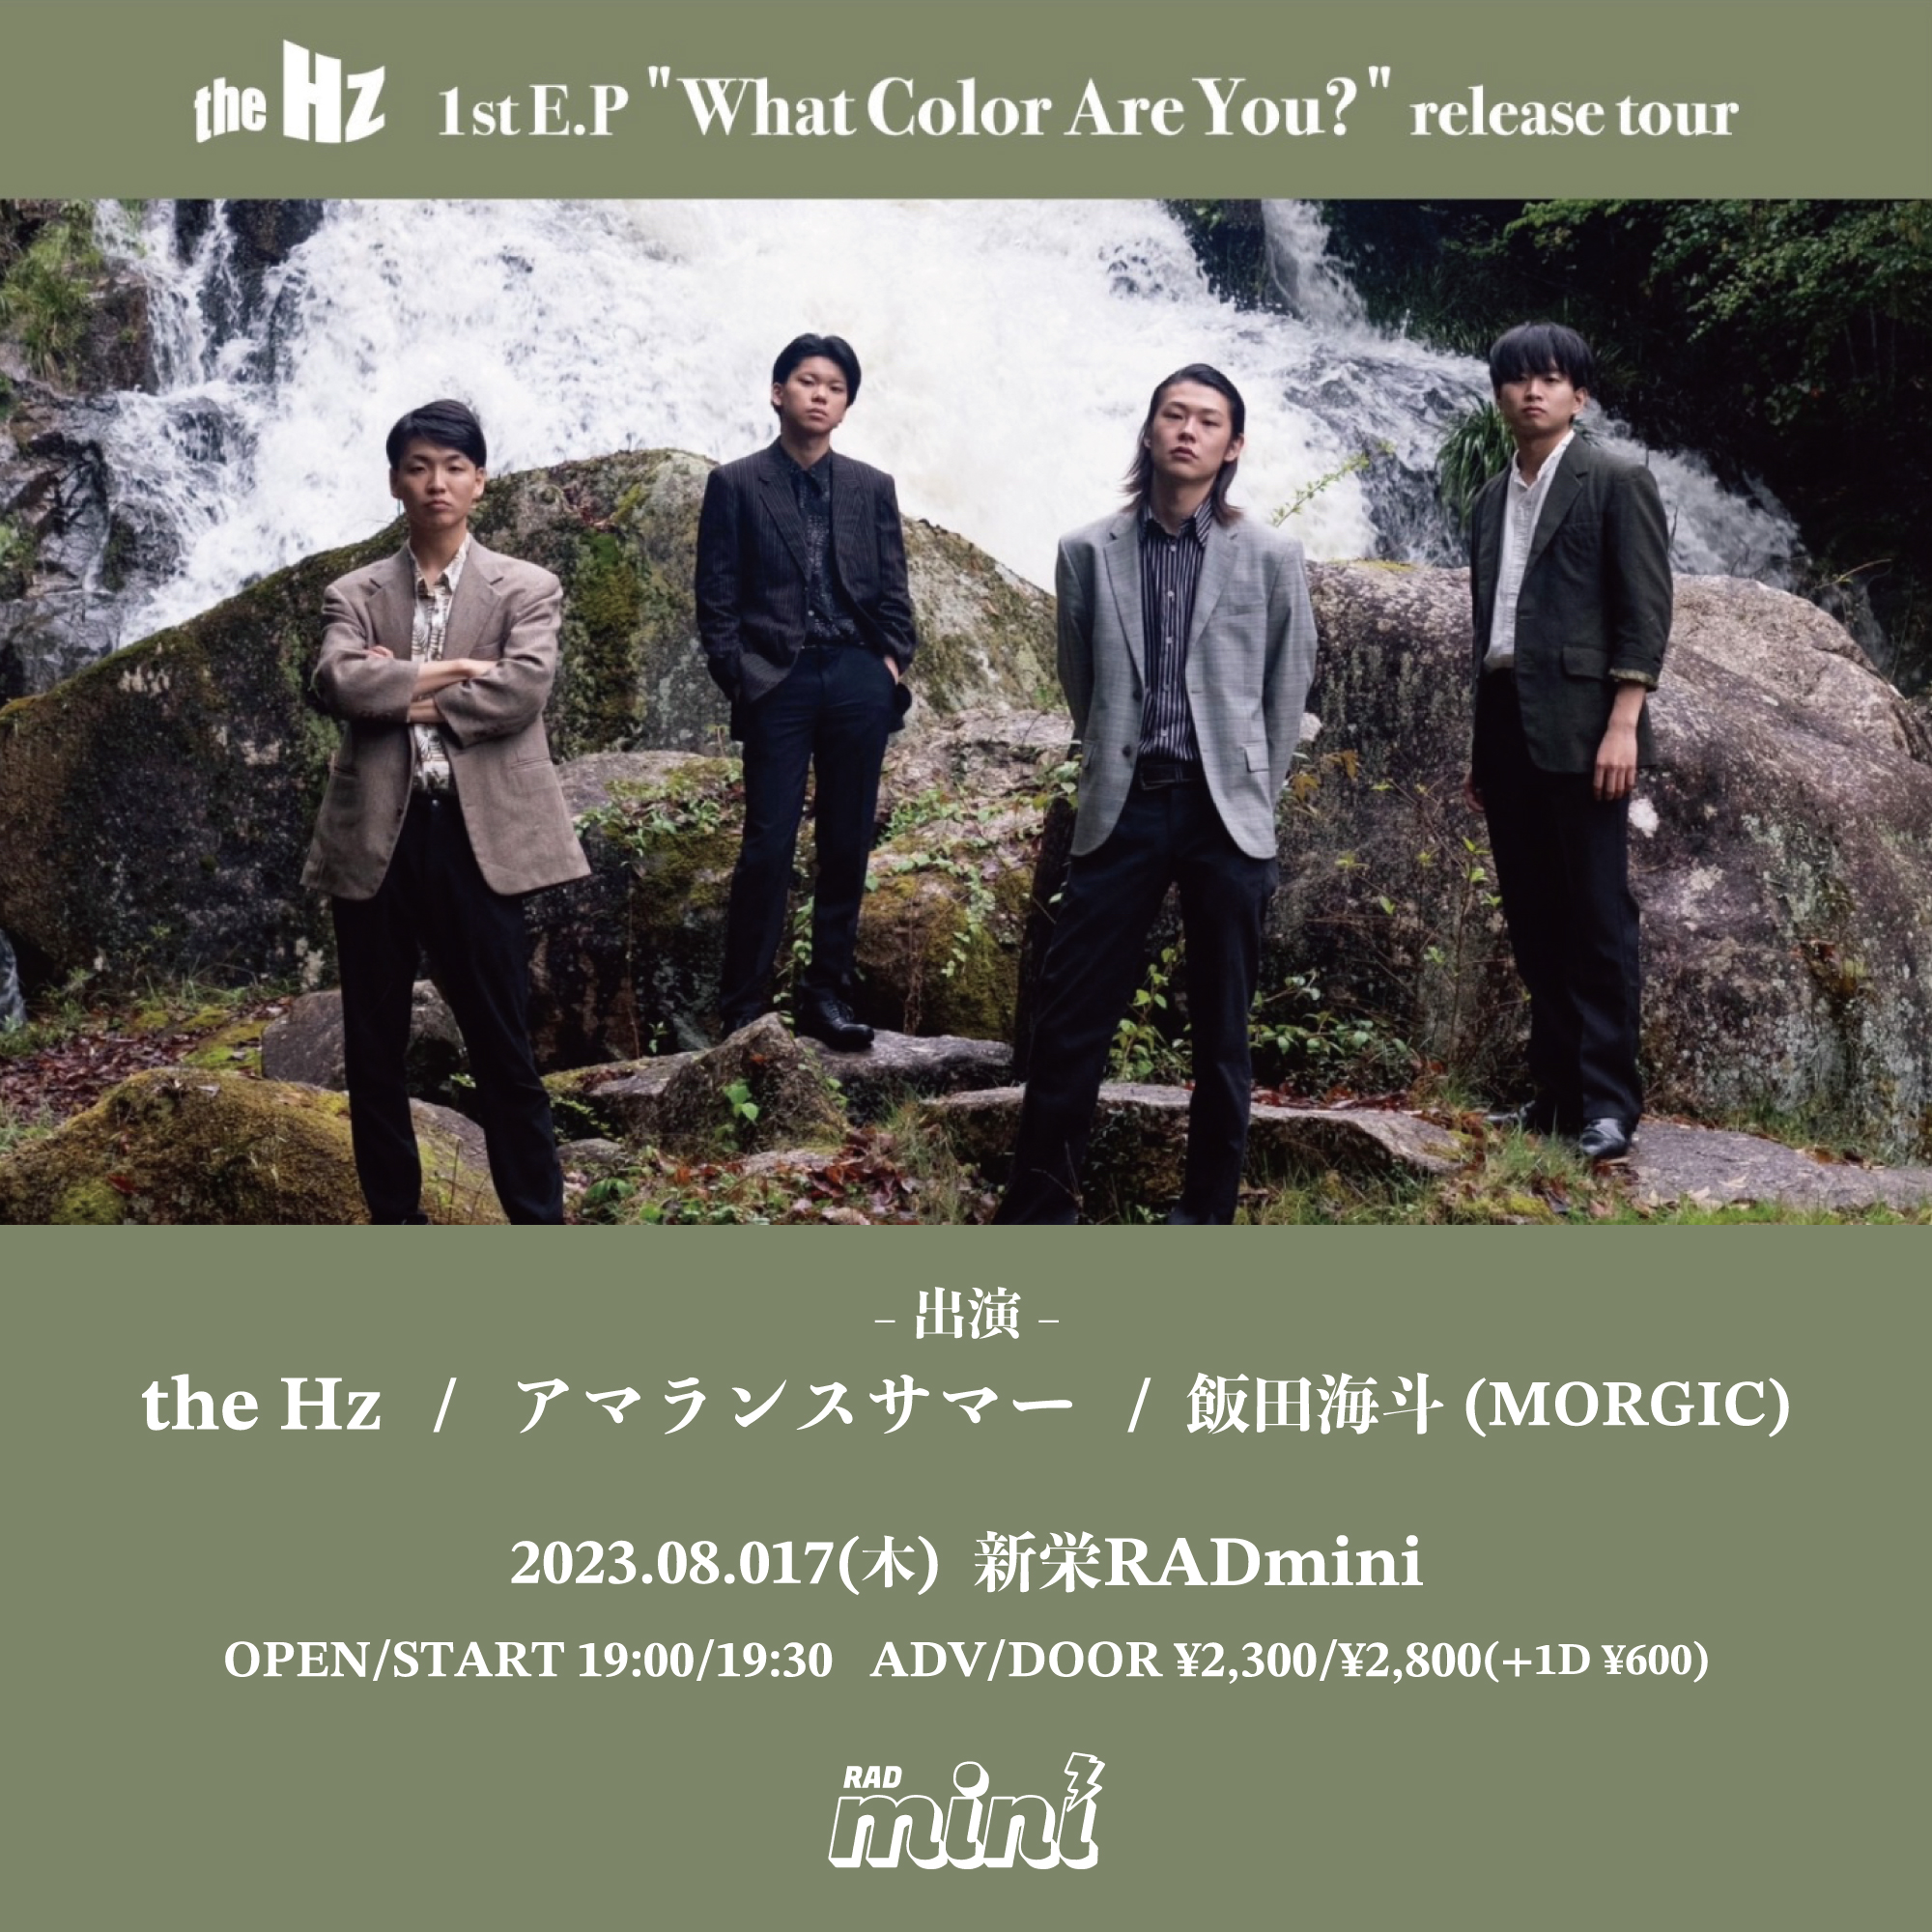 the Hz 1st E.P "What Color Are You?" release tour